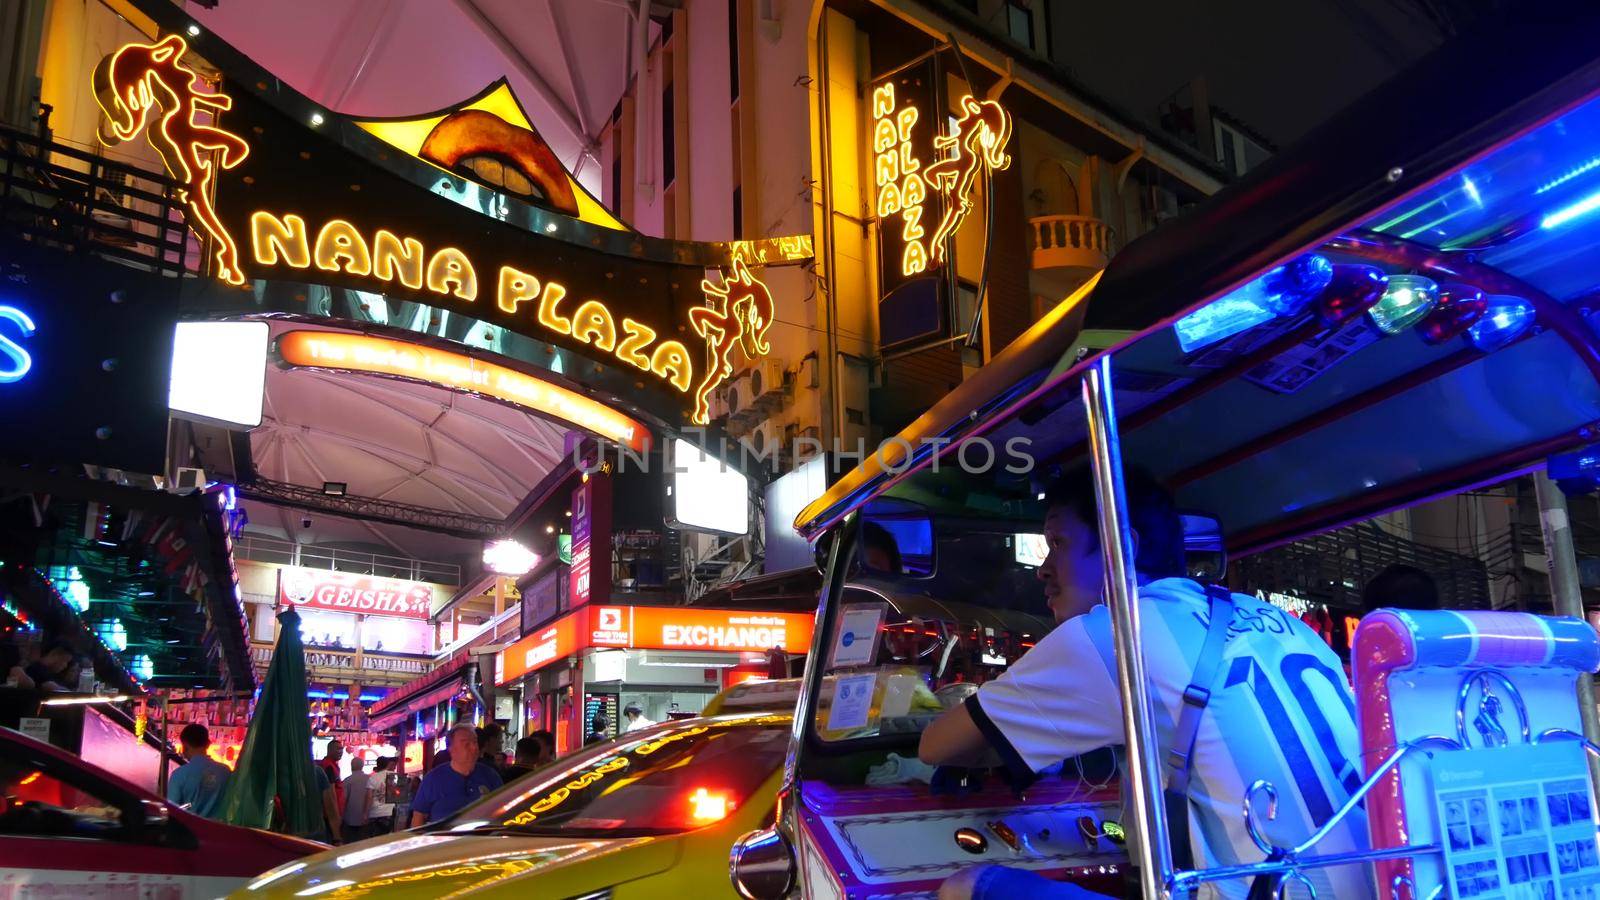 BANGKOK, THAILAND,13 JULY 2019 Vivid neon sign glowing, Nana Plaza street. Nightlife in erotic Red light district soi. Illuminated bar and adult go-go show club. Night life tourist entertainment by DogoraSun